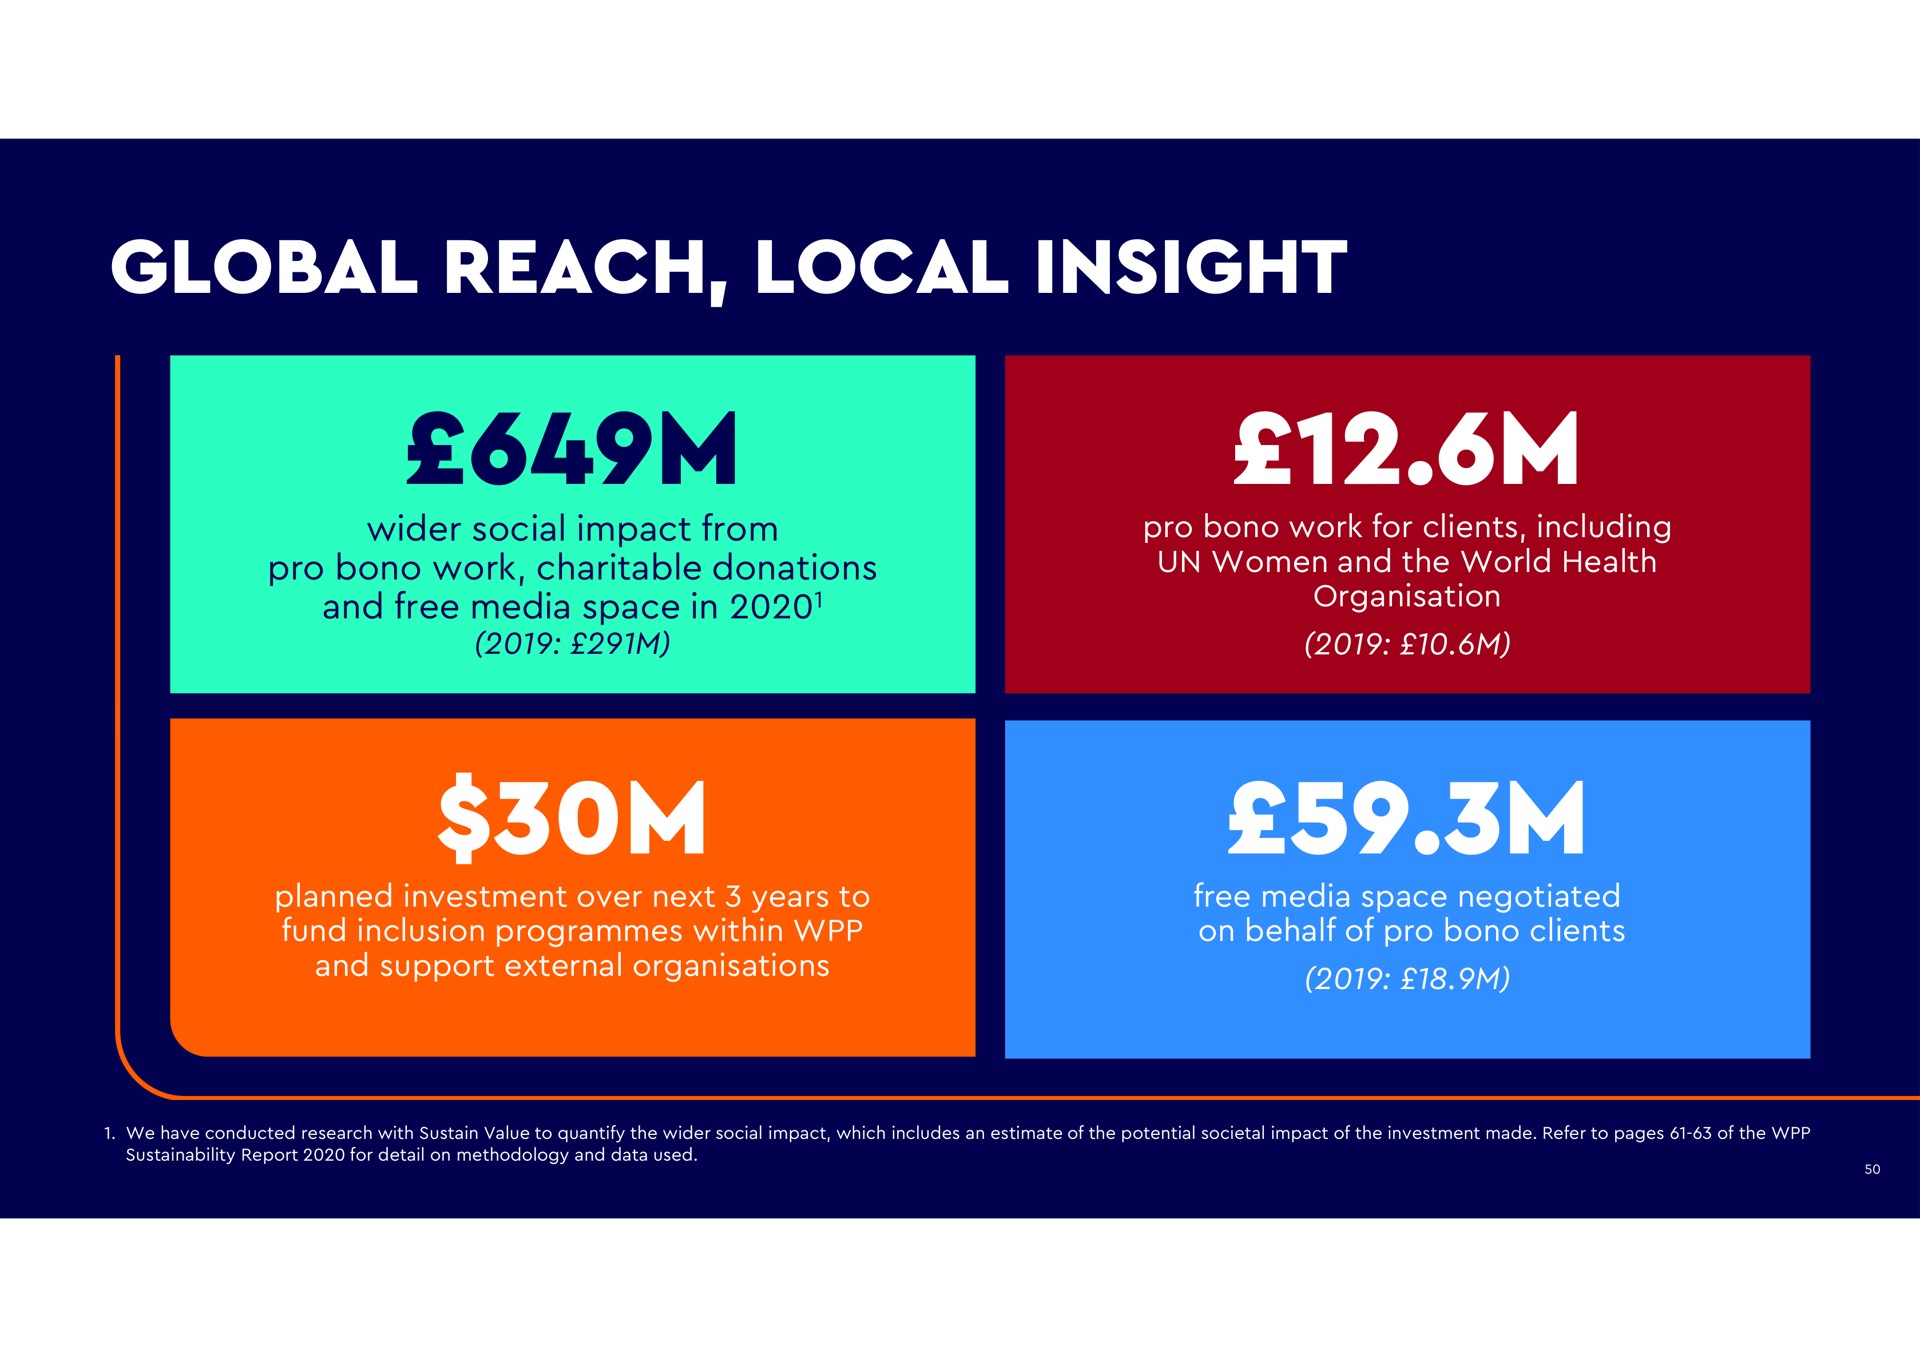 global reach local insight social impact from pro work charitable donations and free media space in pro work for clients including women and the world health report for detail on methodology and data used we have conducted research with sustain value to quantify the social impact which includes an estimate of the potential societal impact of the investment made refer to pages of the | WPP